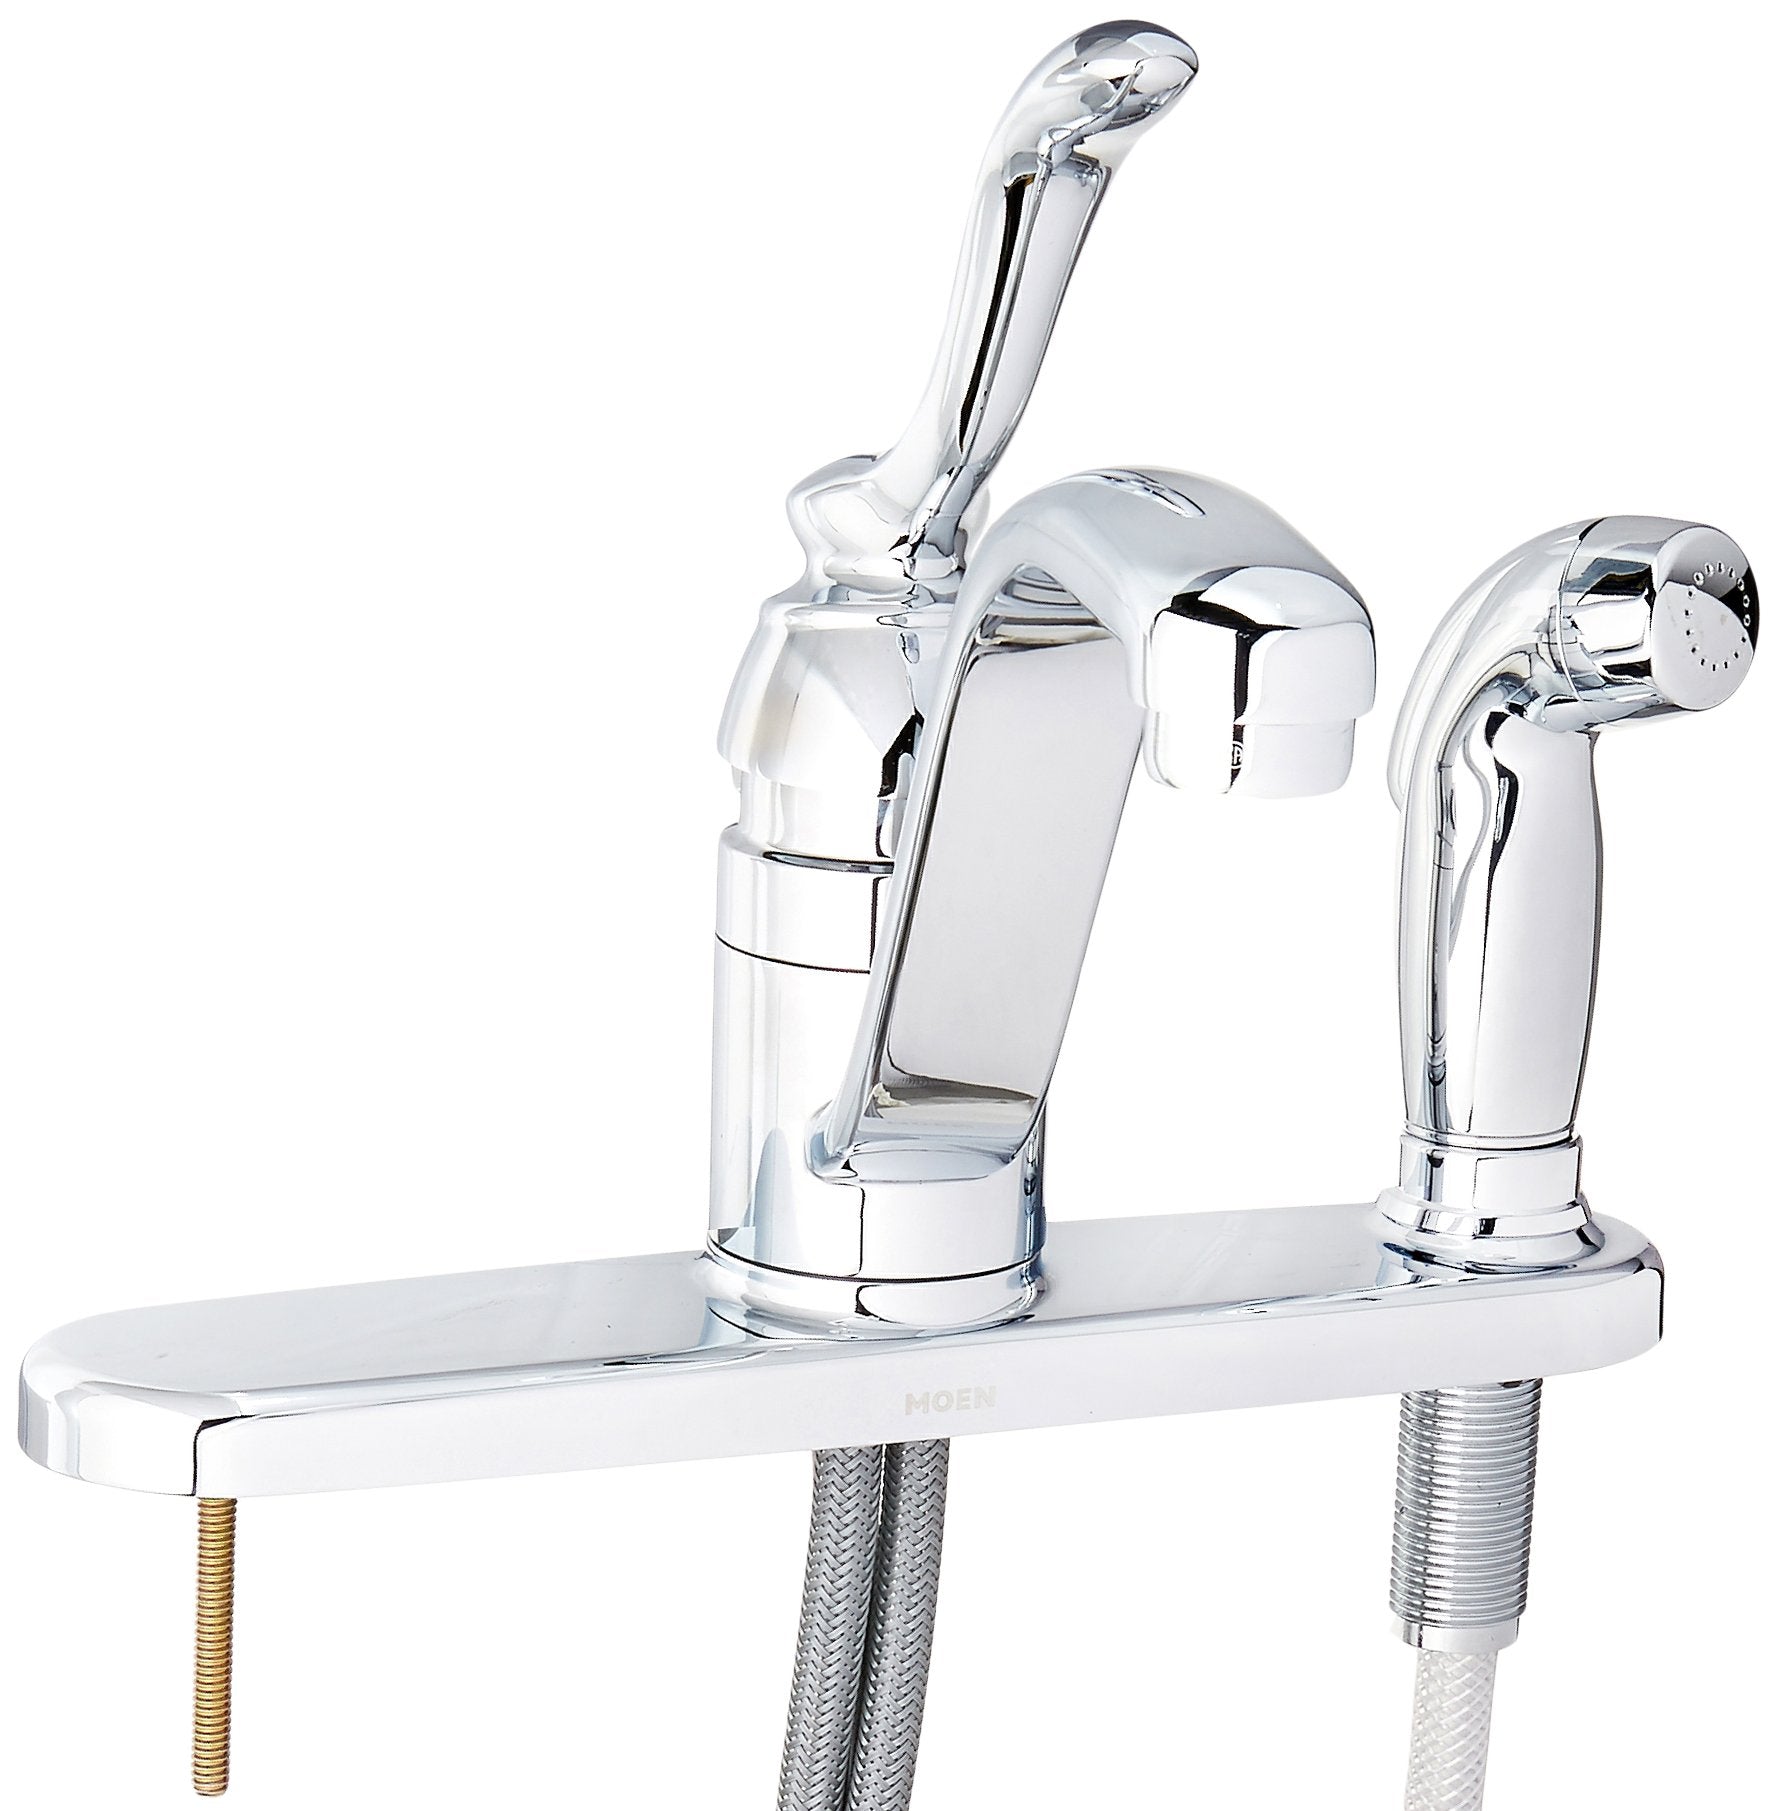 Moen CA87527 Kitchen Faucet with Side Spray from the Banbury Collection, Chrome (7645510435054)